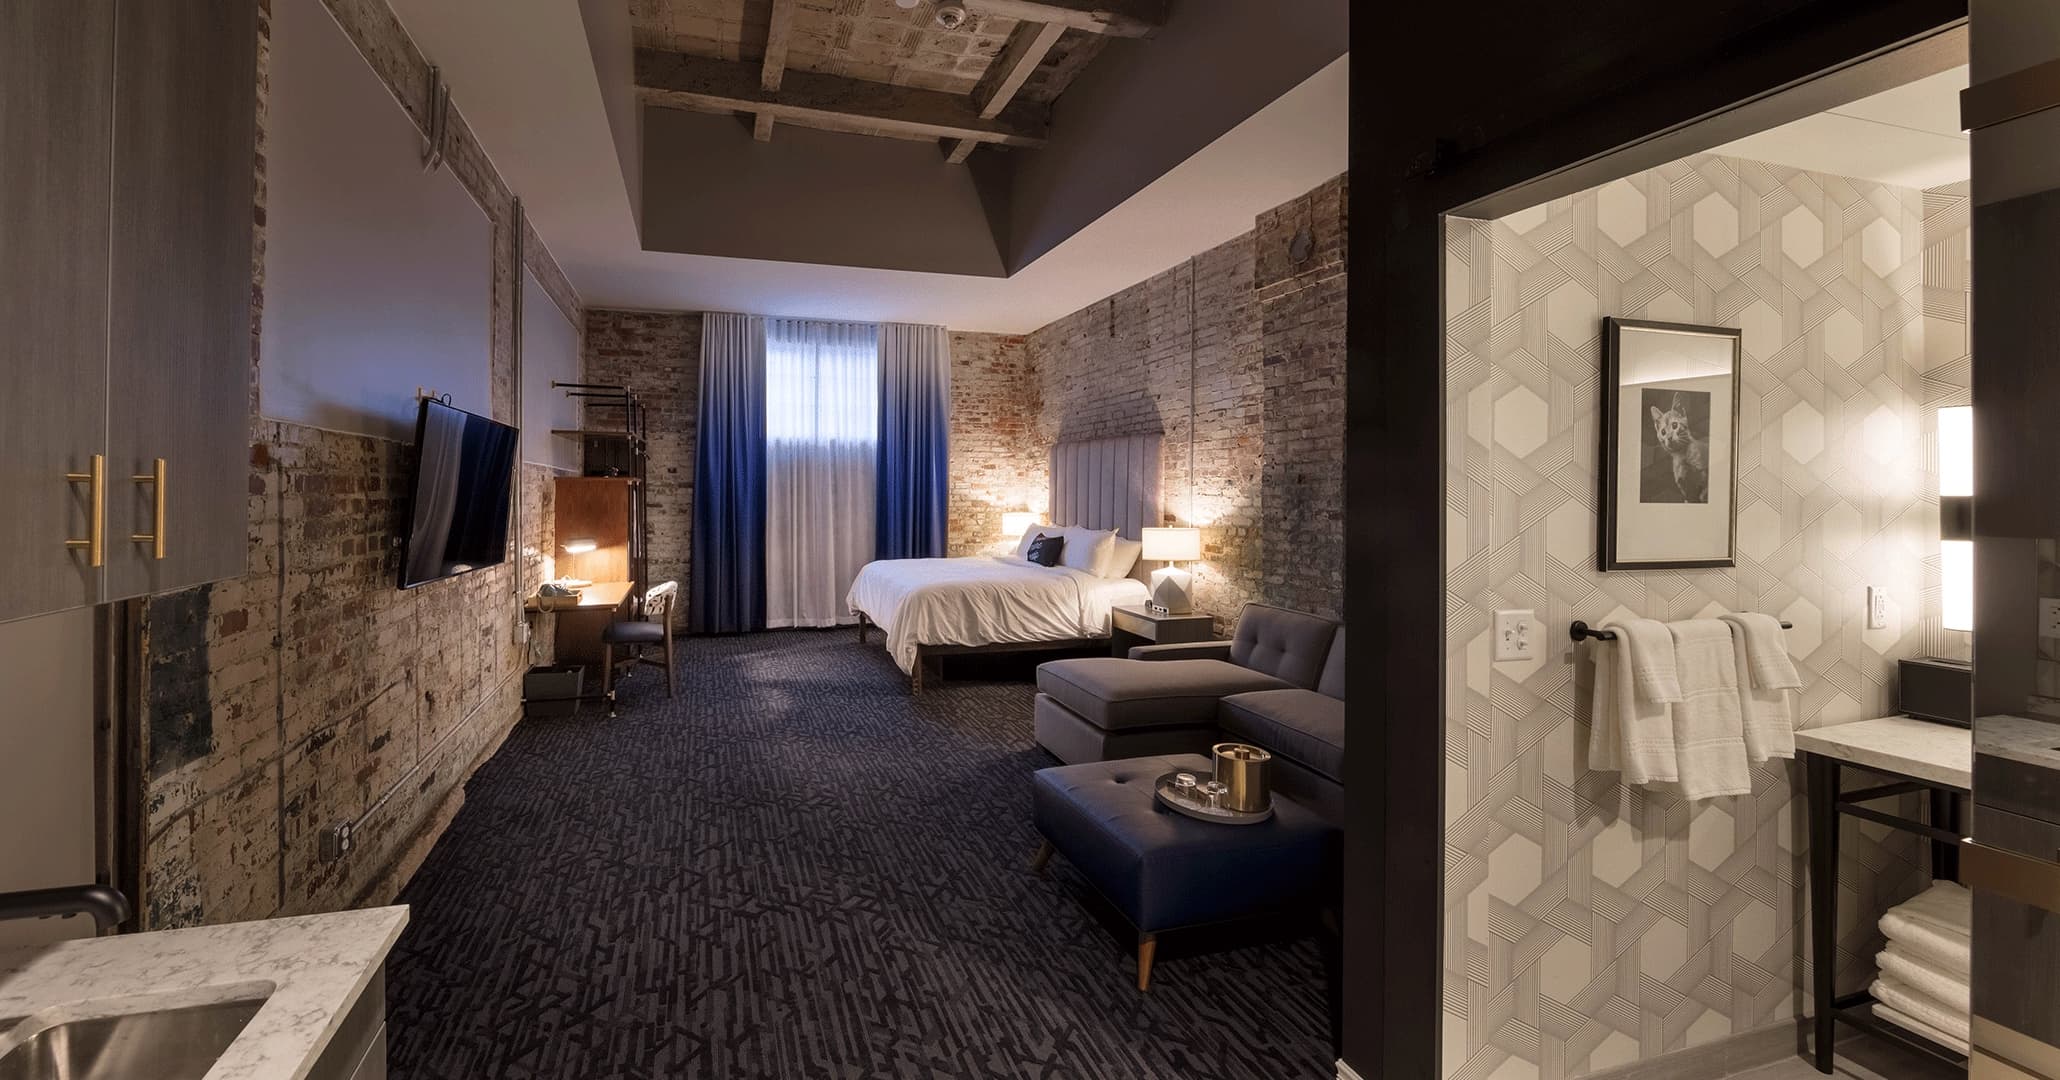 Boudreaux architects maximized the space to create 41 room hotel in downtown Columbia, SC.